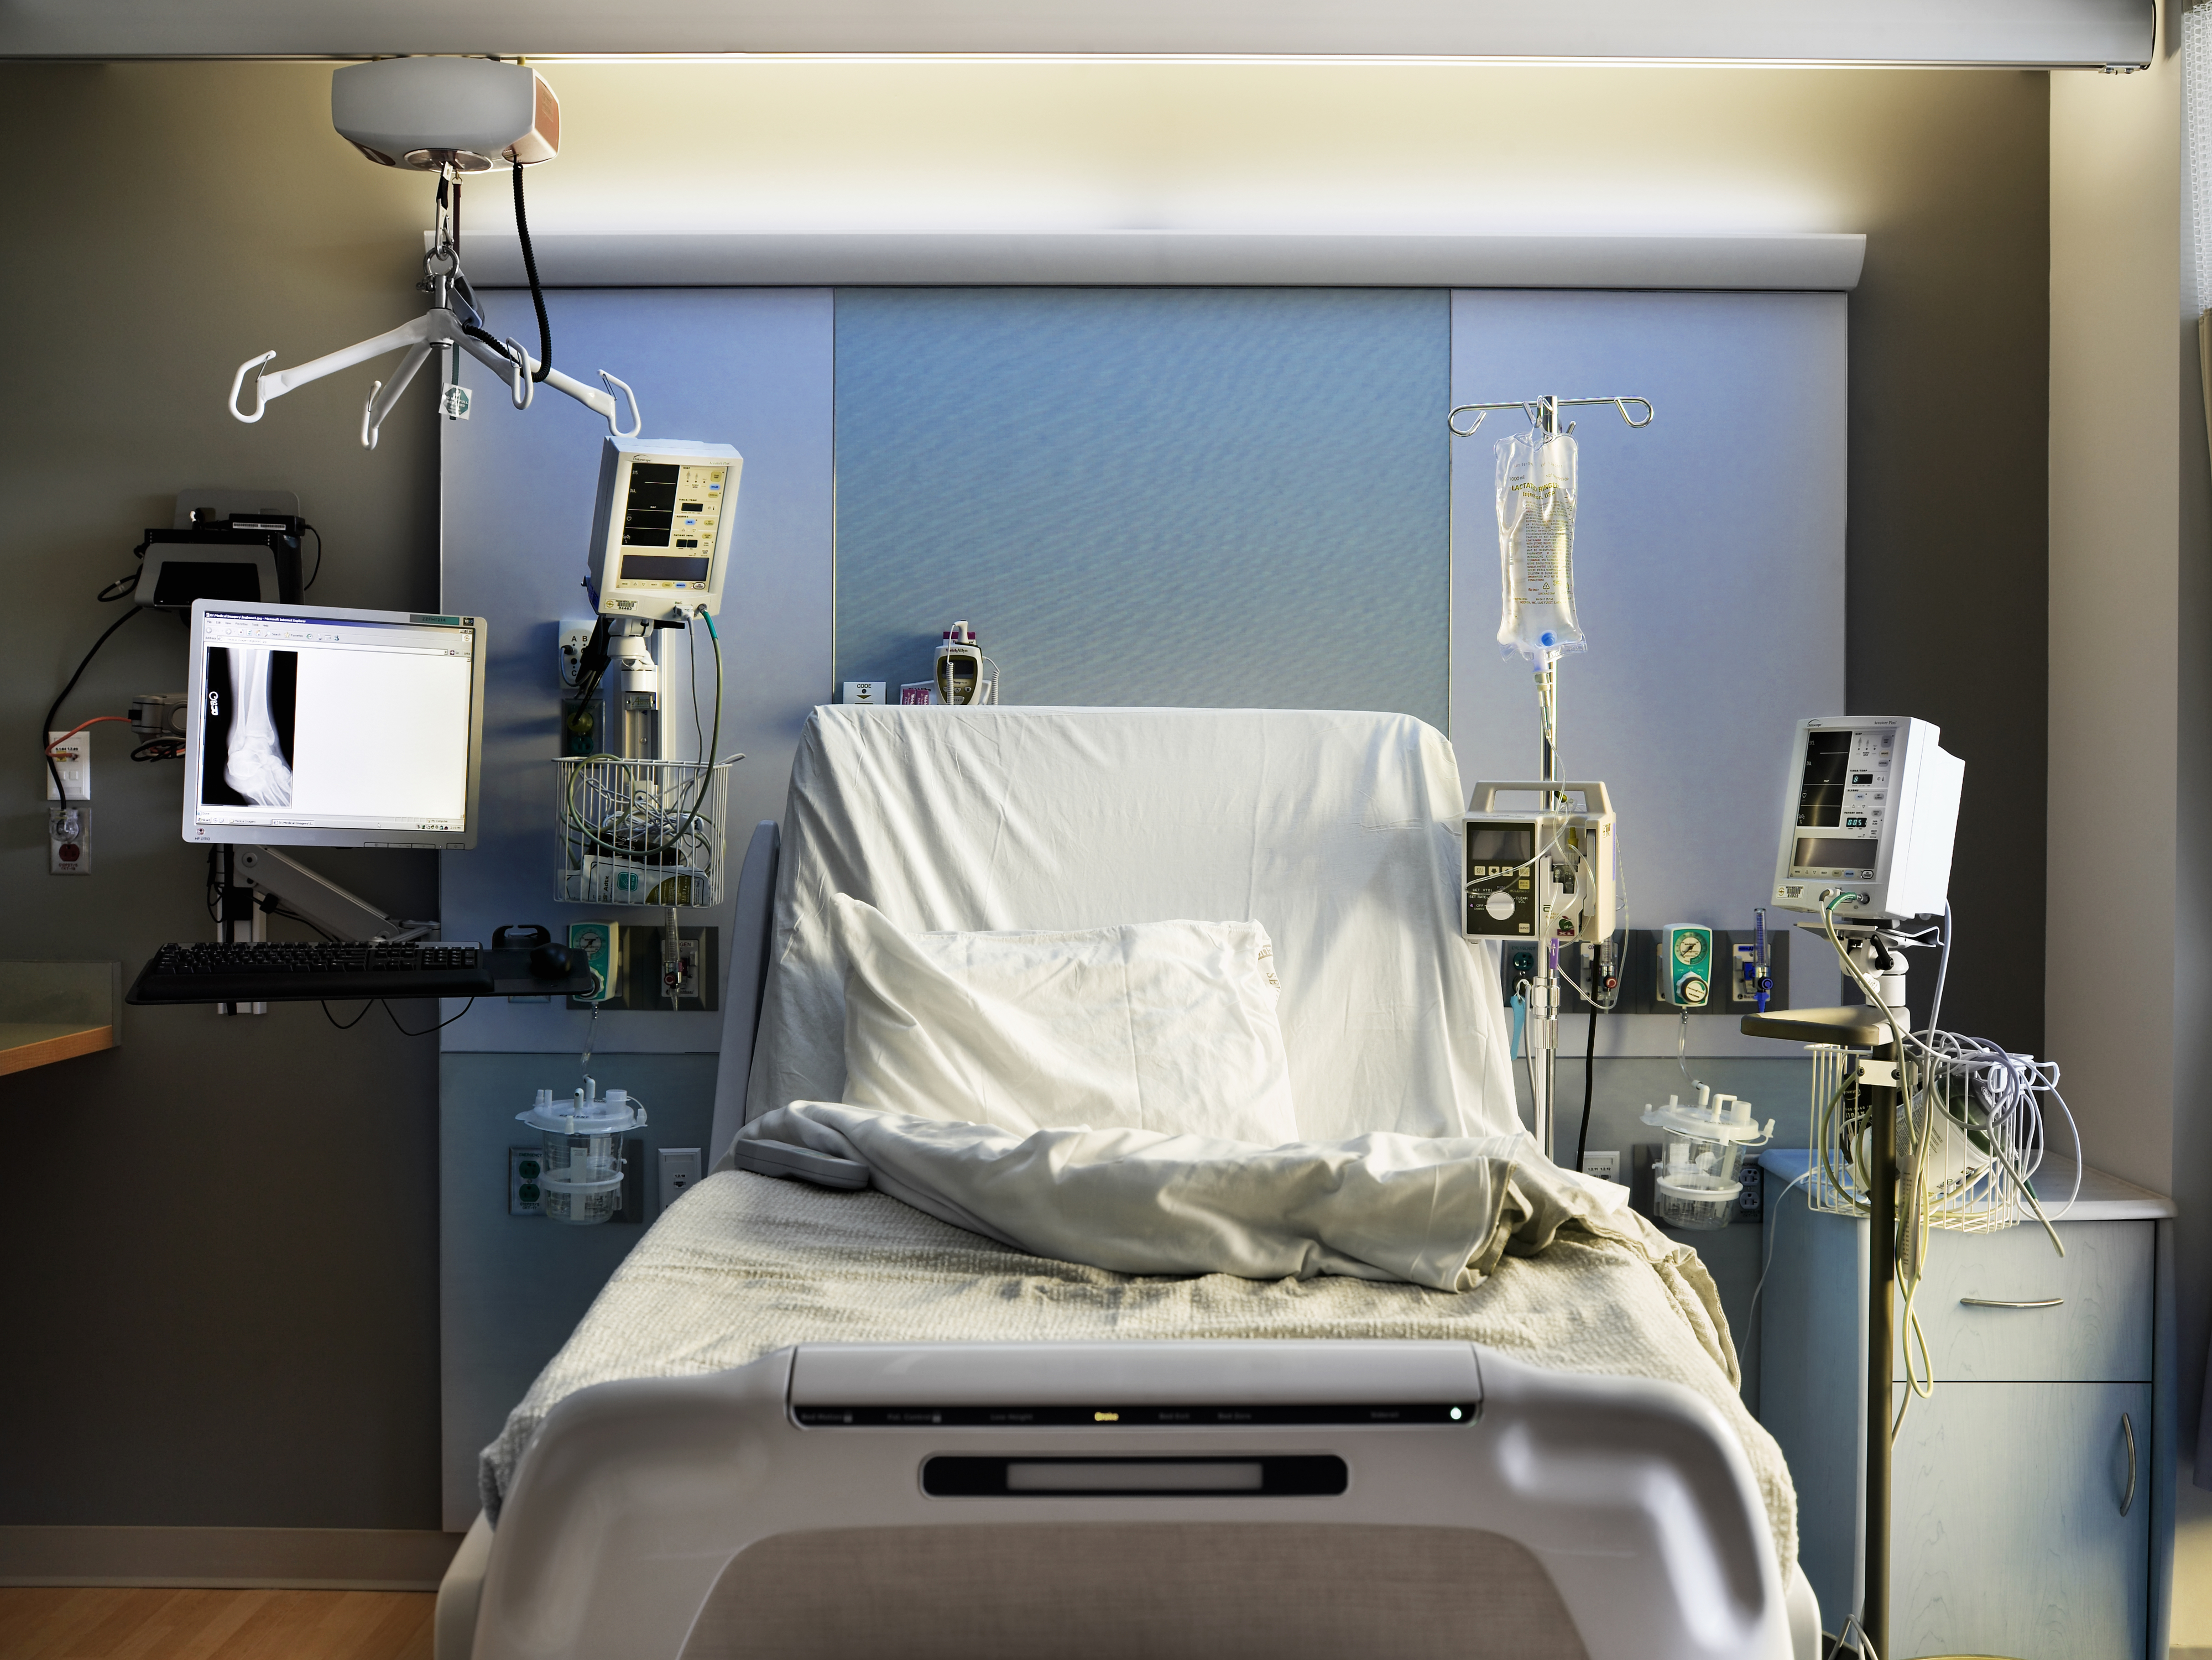 Empty hospital bed surrounded by medical equipment